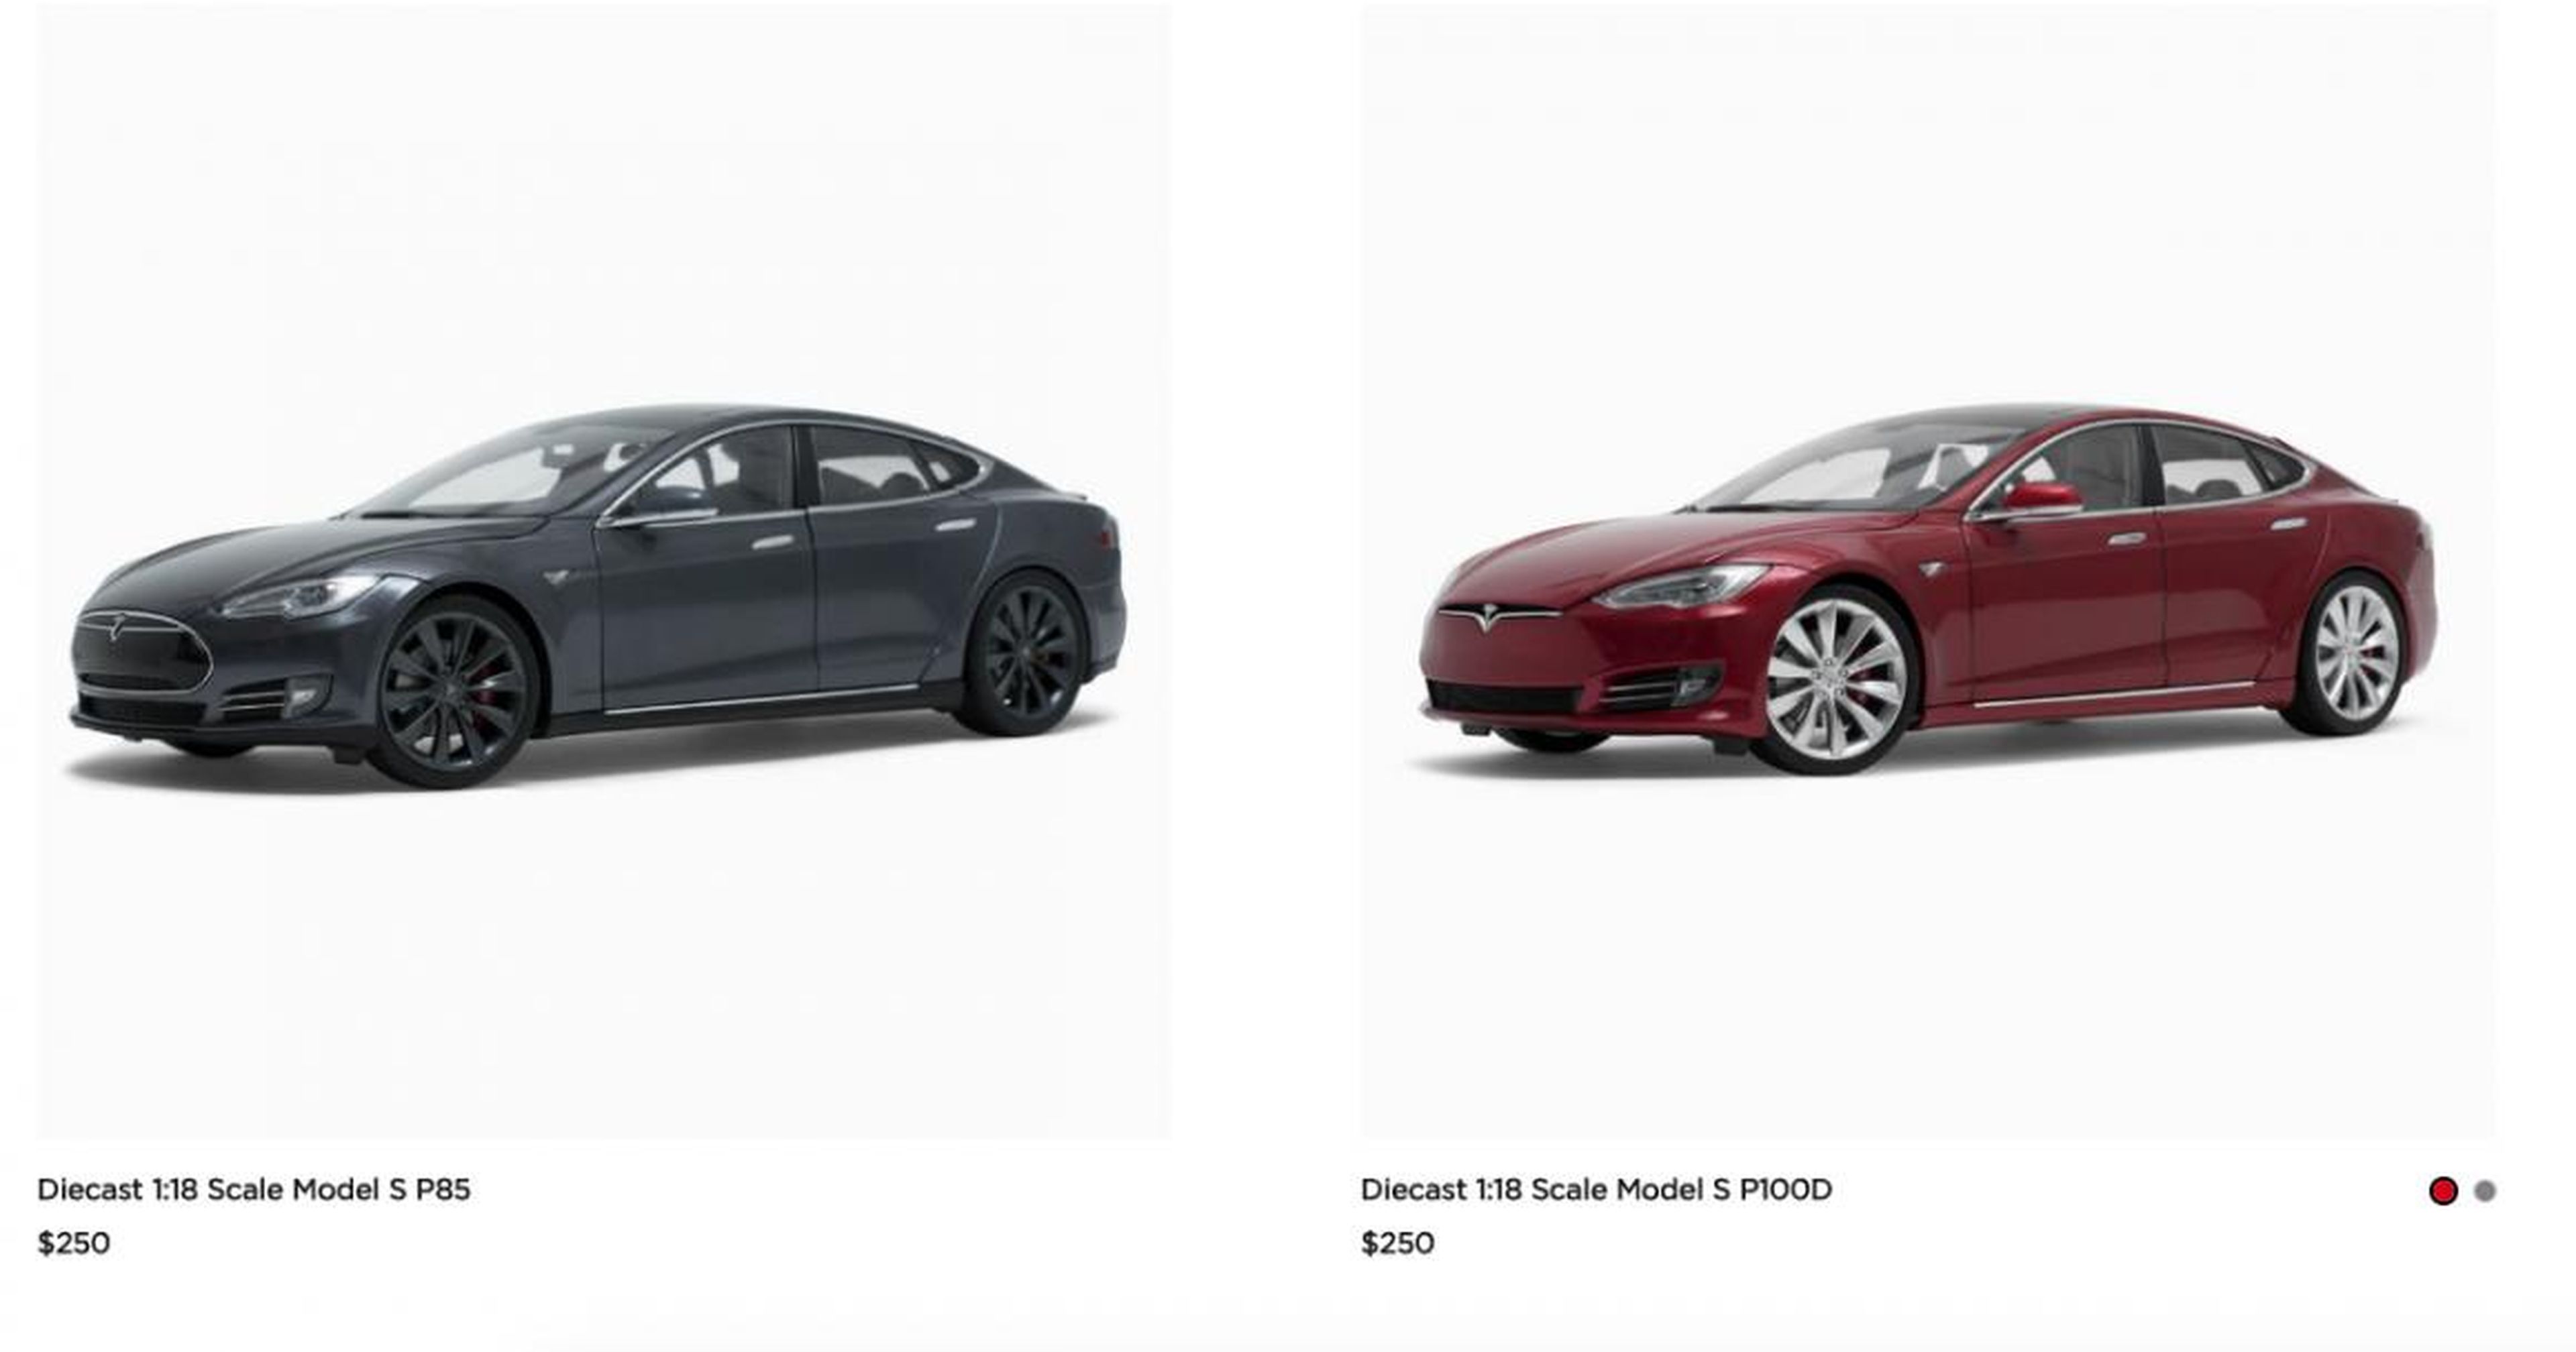 There's also two 1:18 scale models of the Tesla Model S.